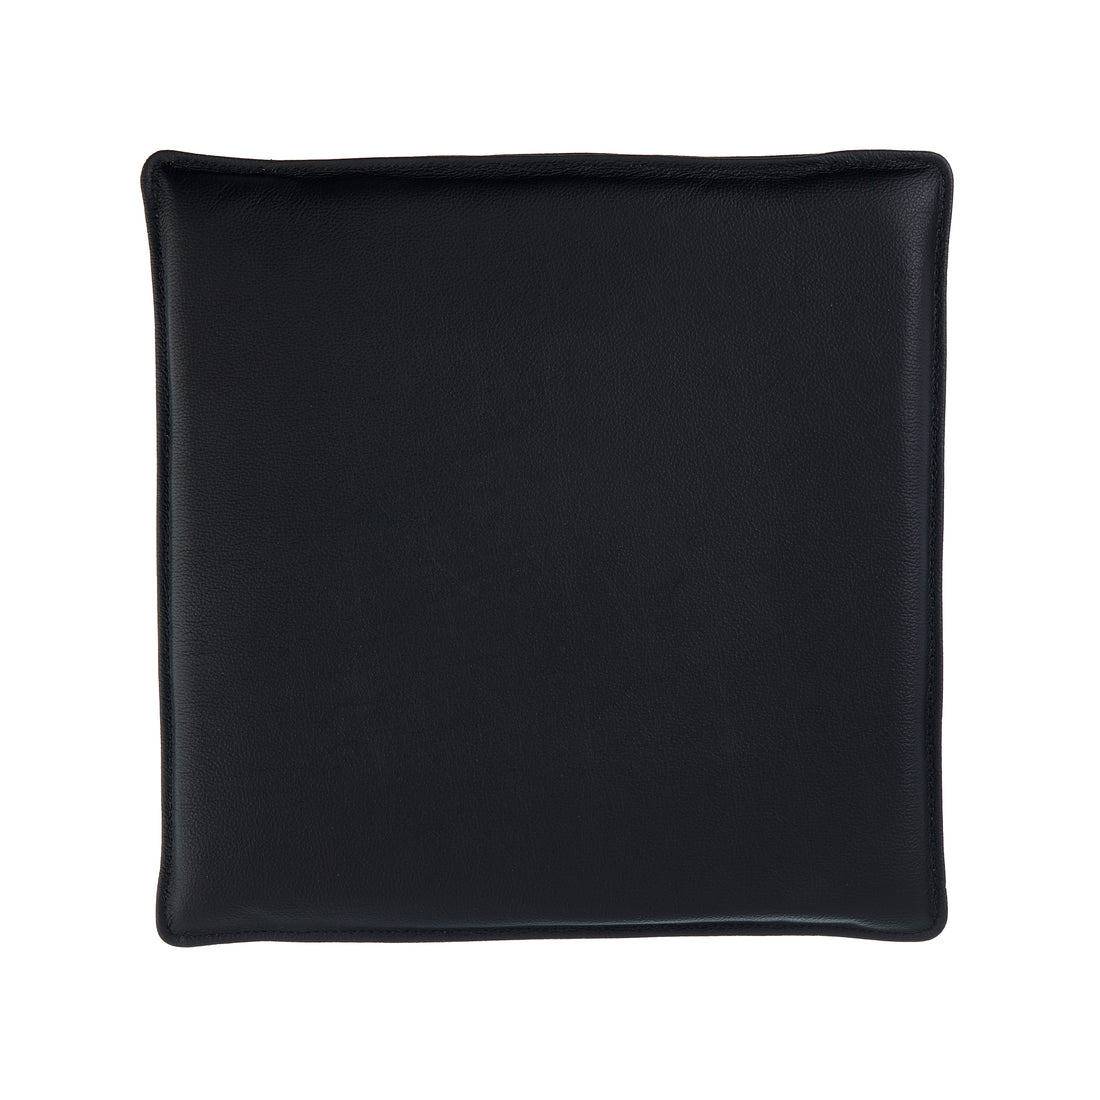 Universal cushion 40x40 cm in black leather without buttons